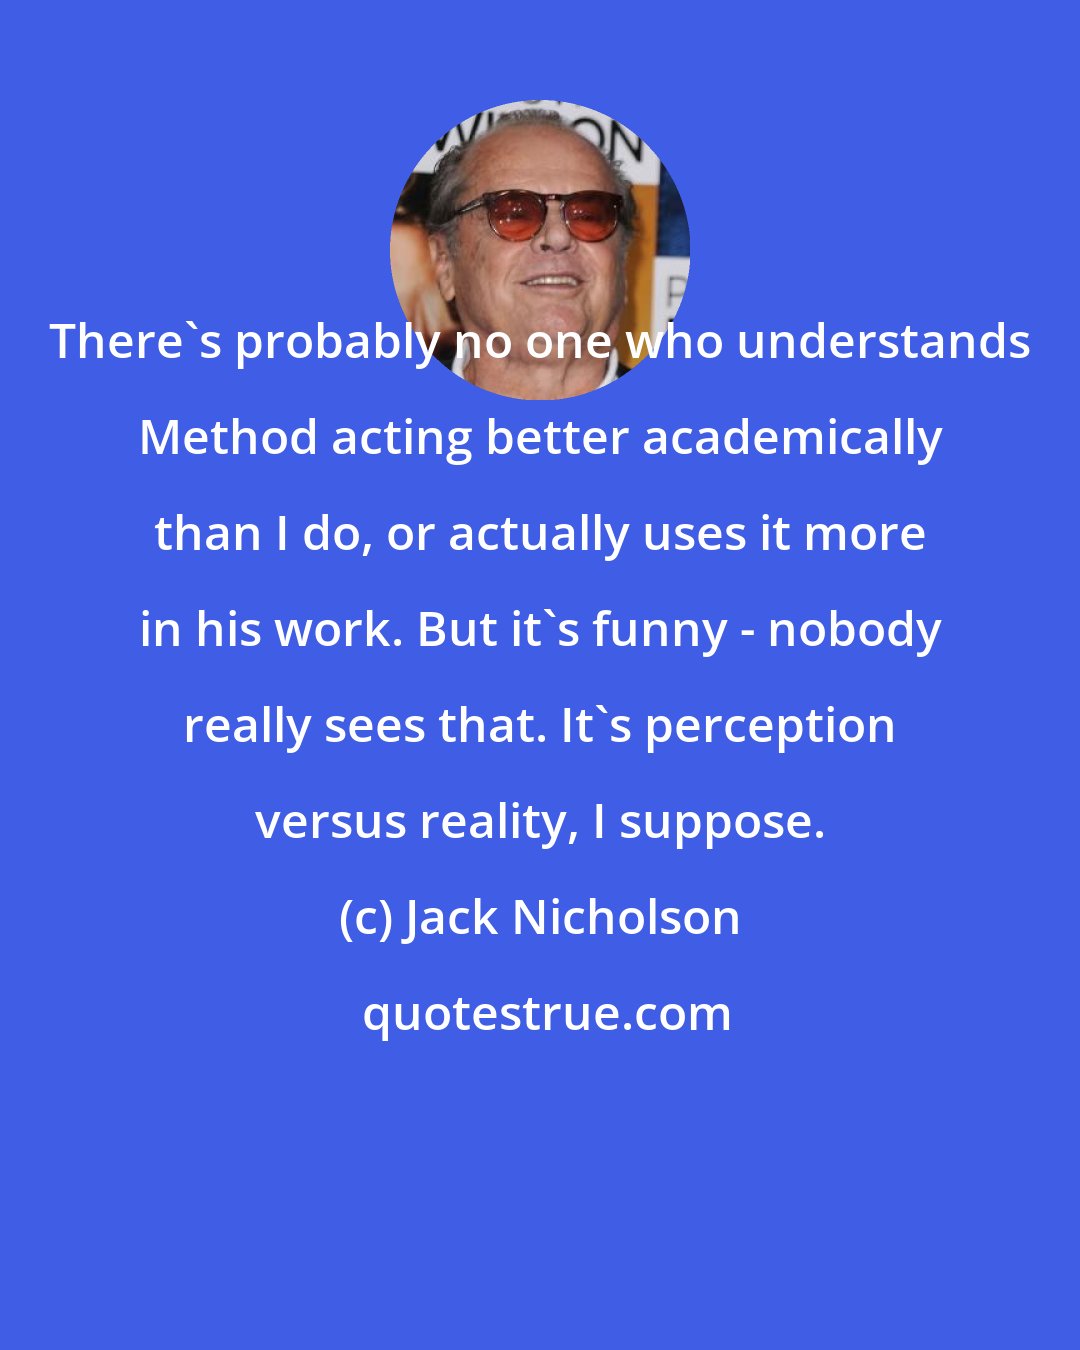 Jack Nicholson: There's probably no one who understands Method acting better academically than I do, or actually uses it more in his work. But it's funny - nobody really sees that. It's perception versus reality, I suppose.